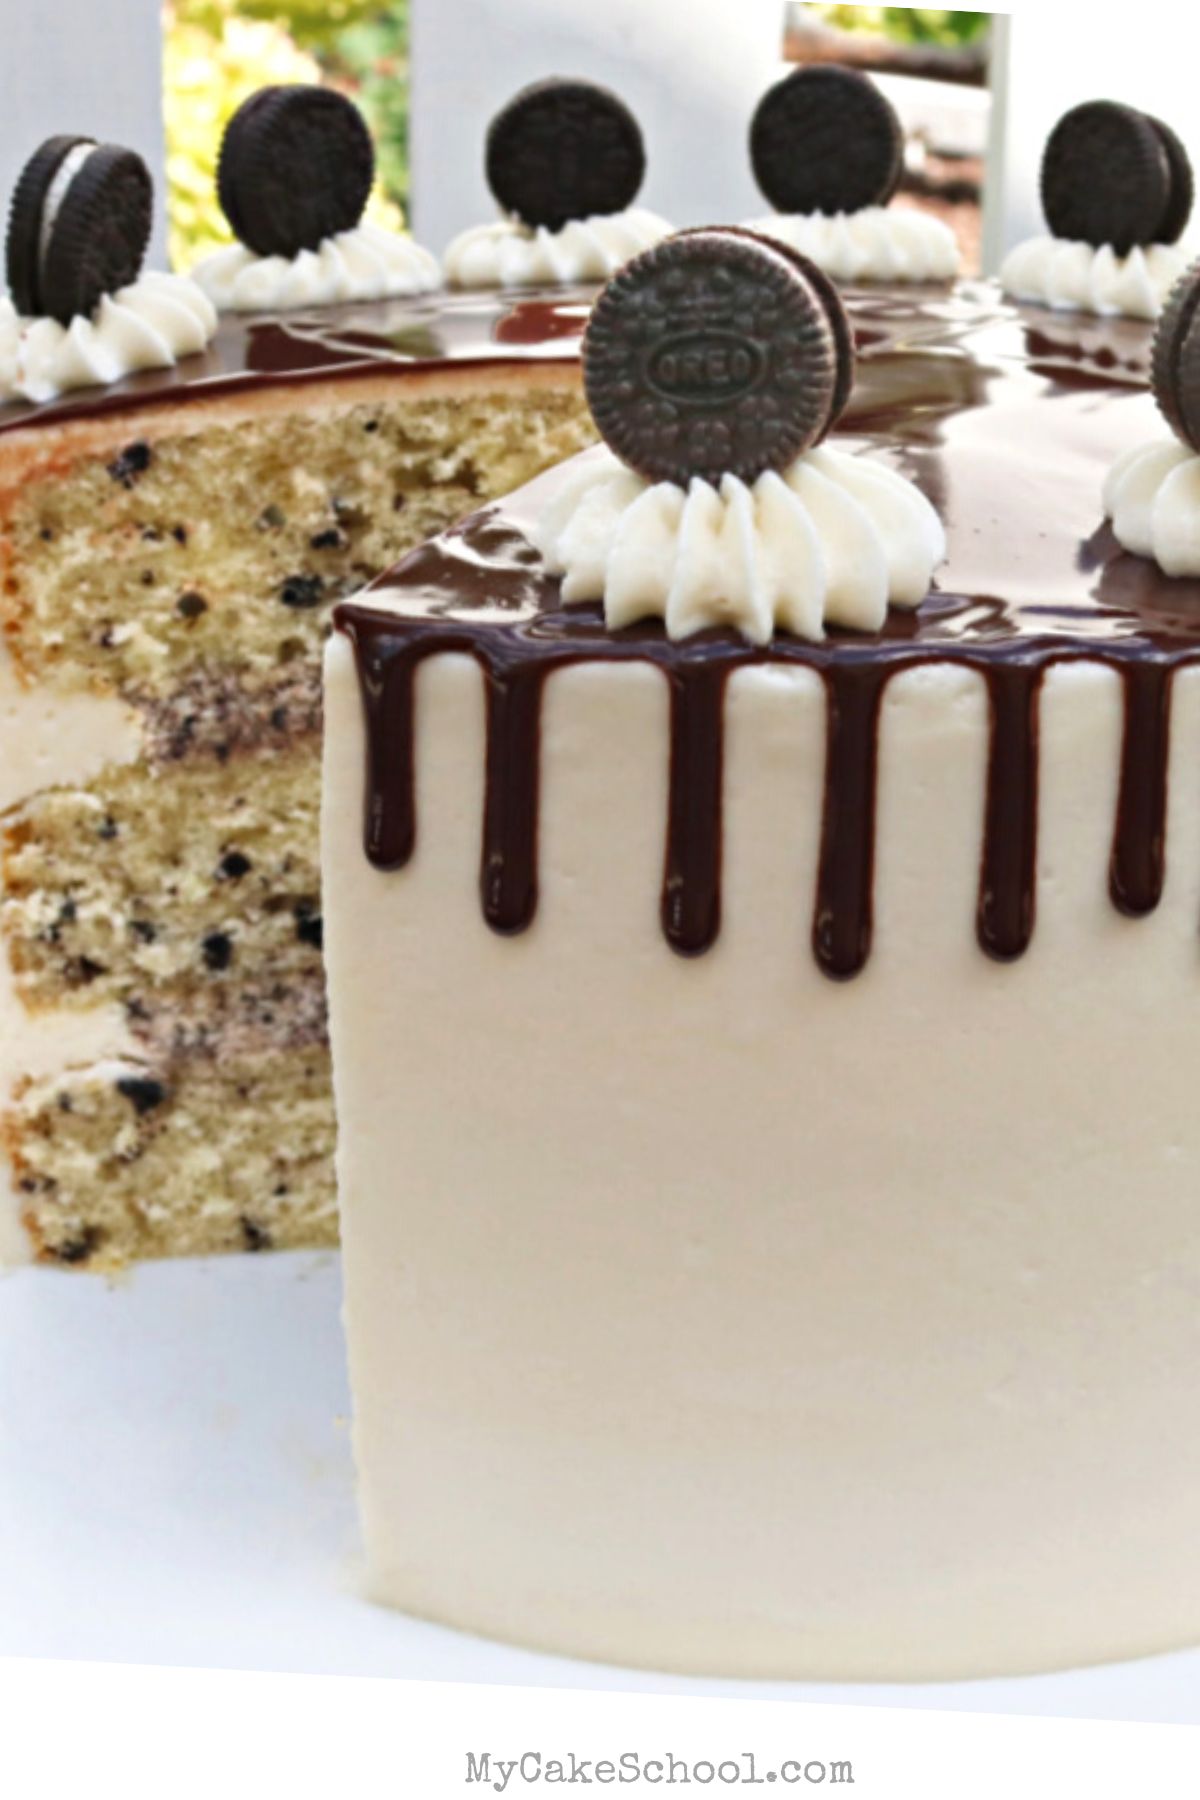 Cookies and Cream Cake, sliced, on a pedestal.